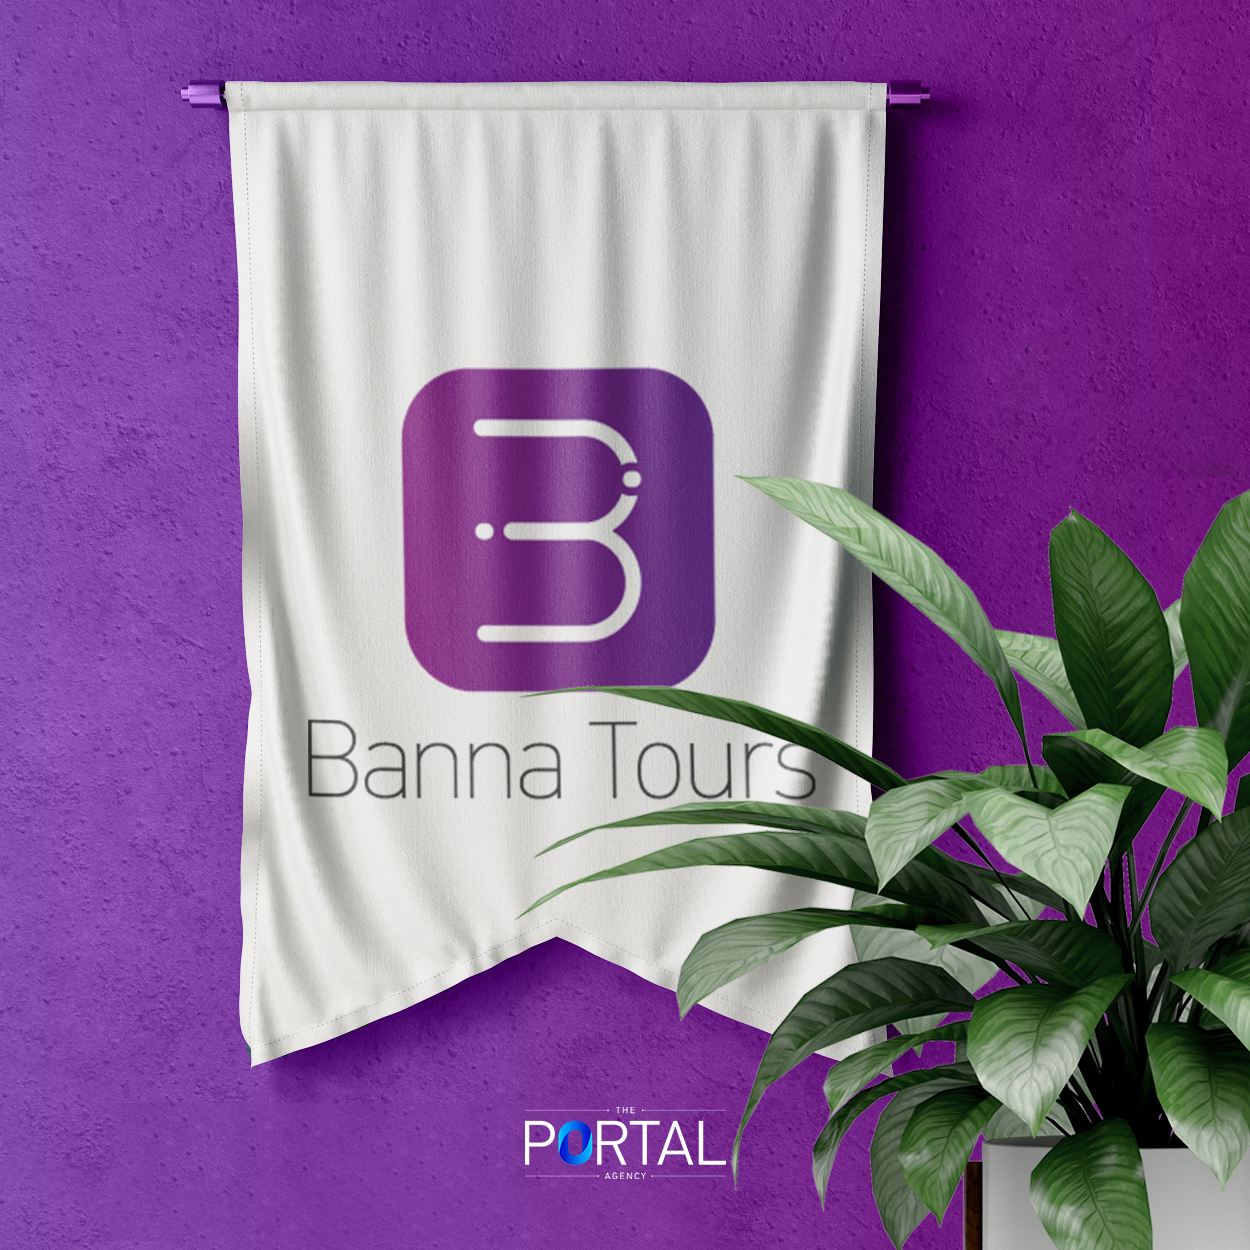 https://theportalagency.com/project/banna-tours-branding/